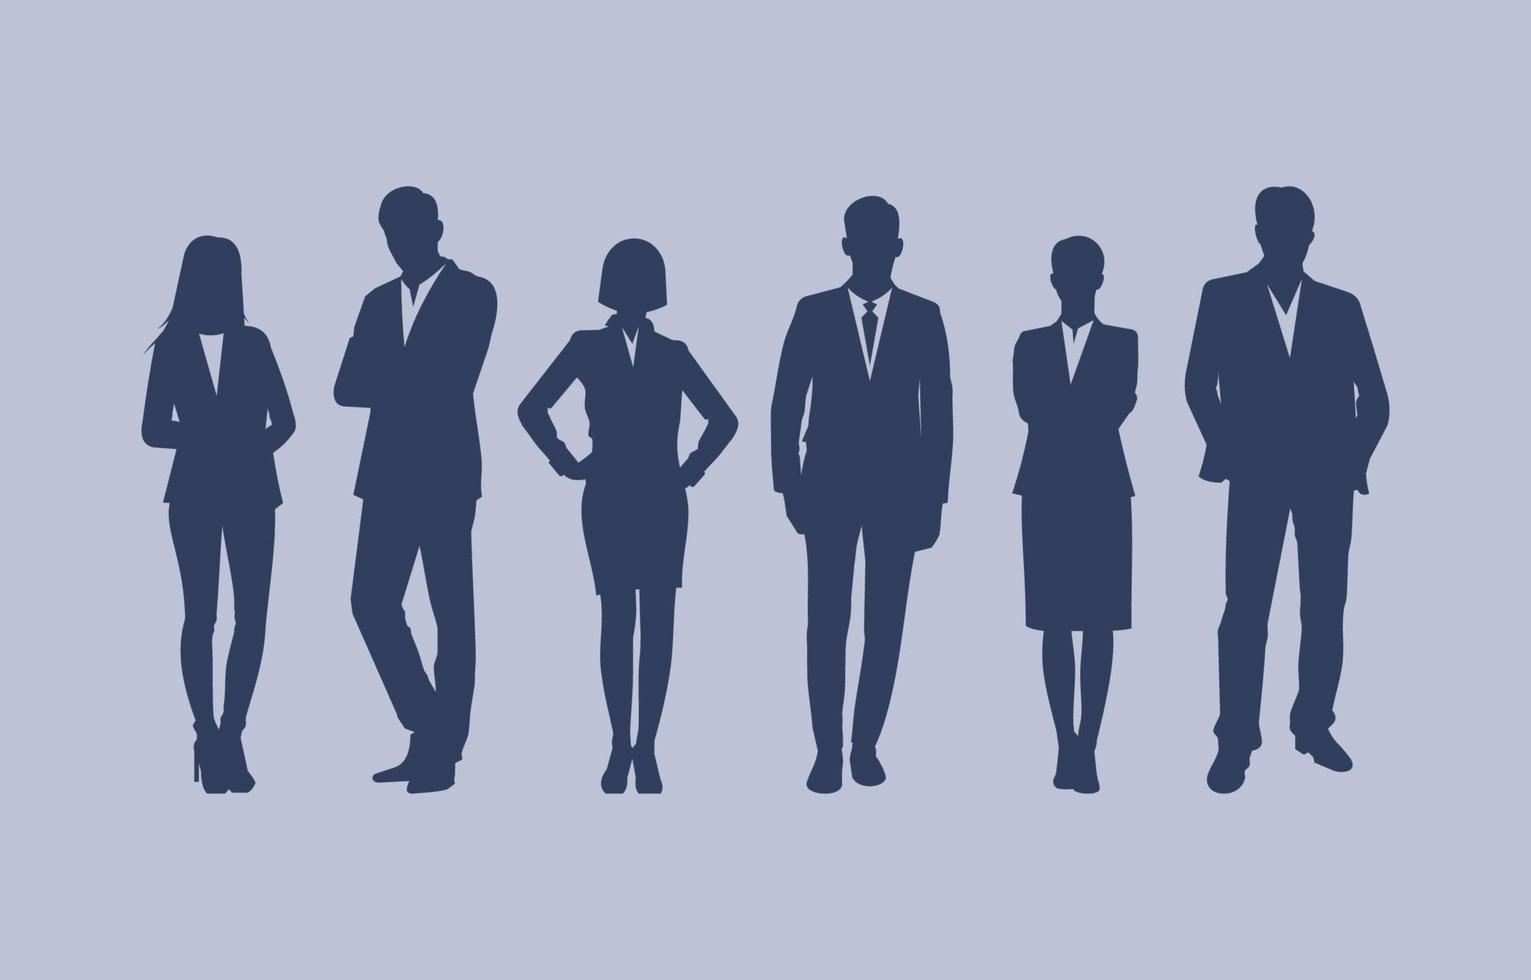 Business People Silhouettes Individual Character Collection vector